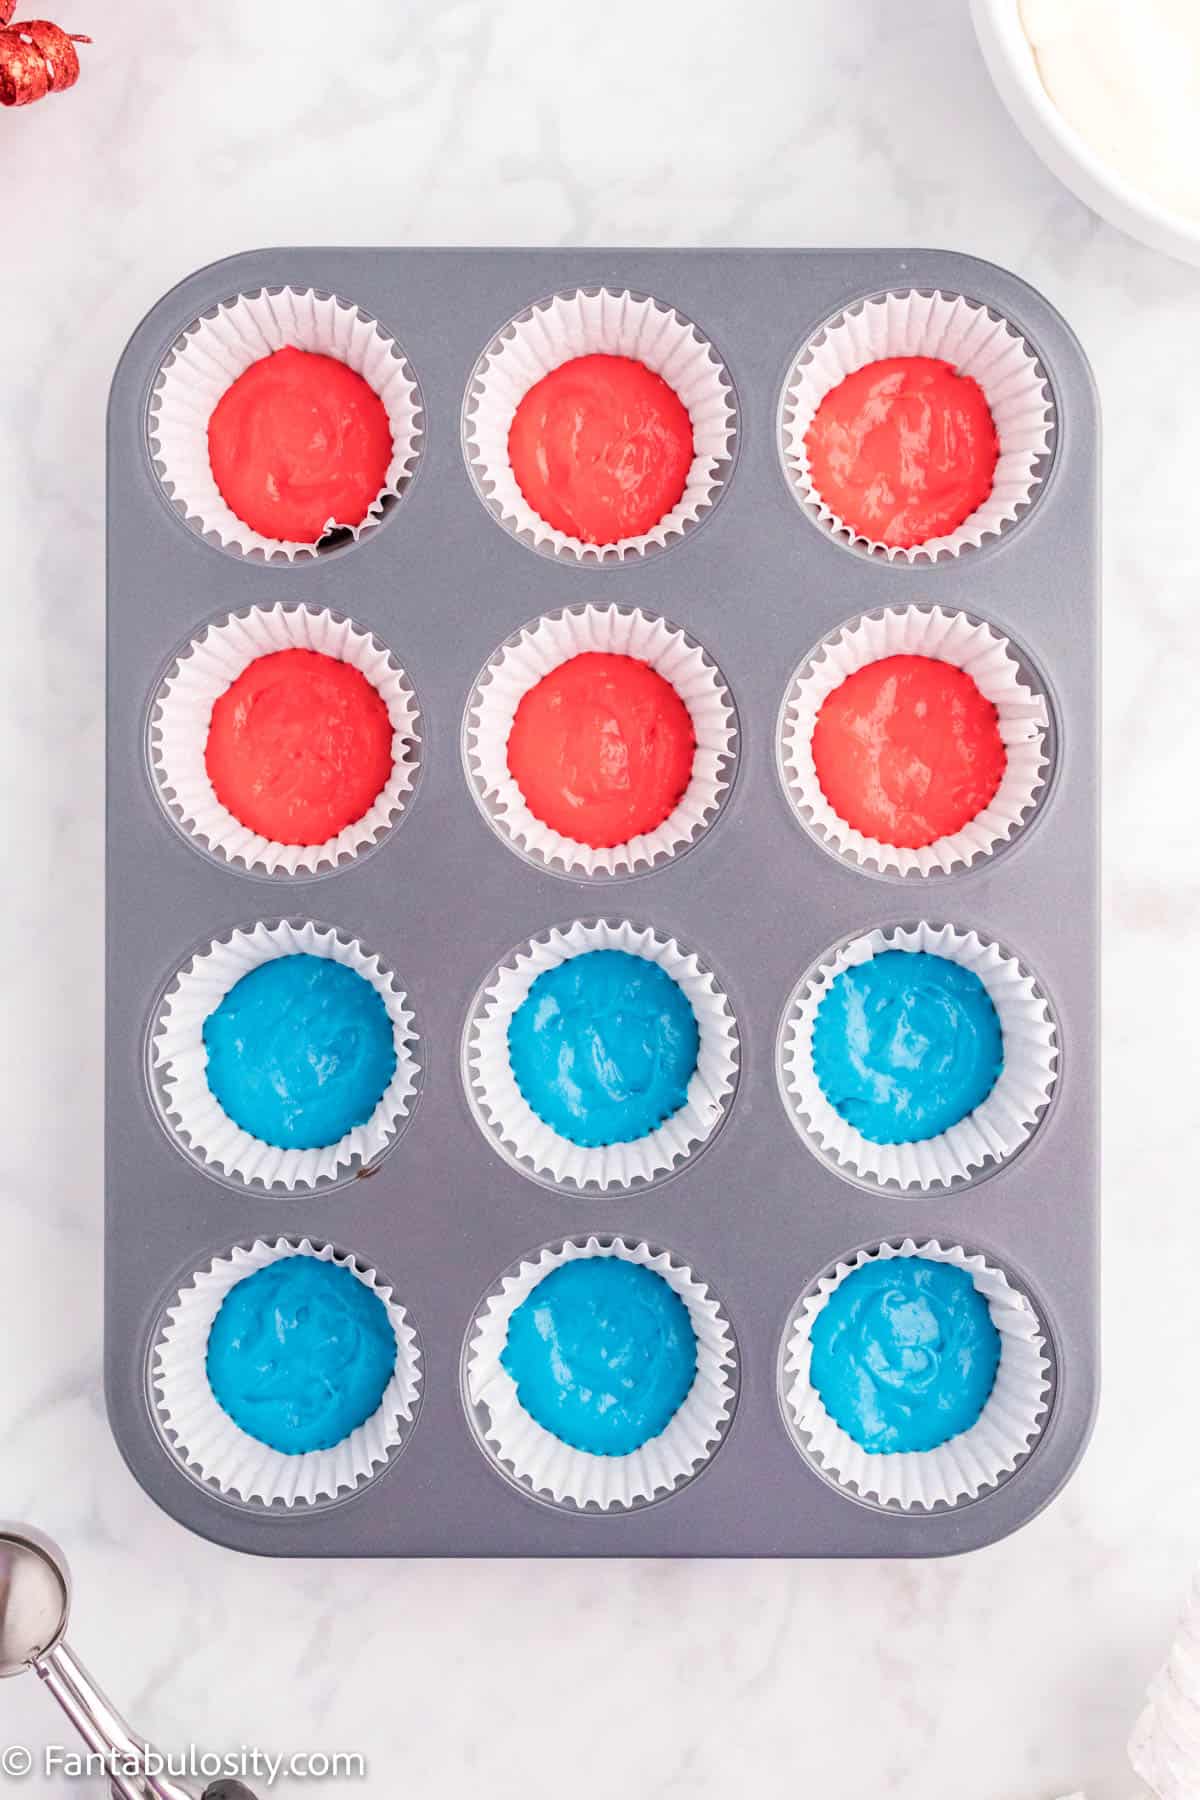 12 cupcake liners, 6 with blue batter and 6 with red batter in them.